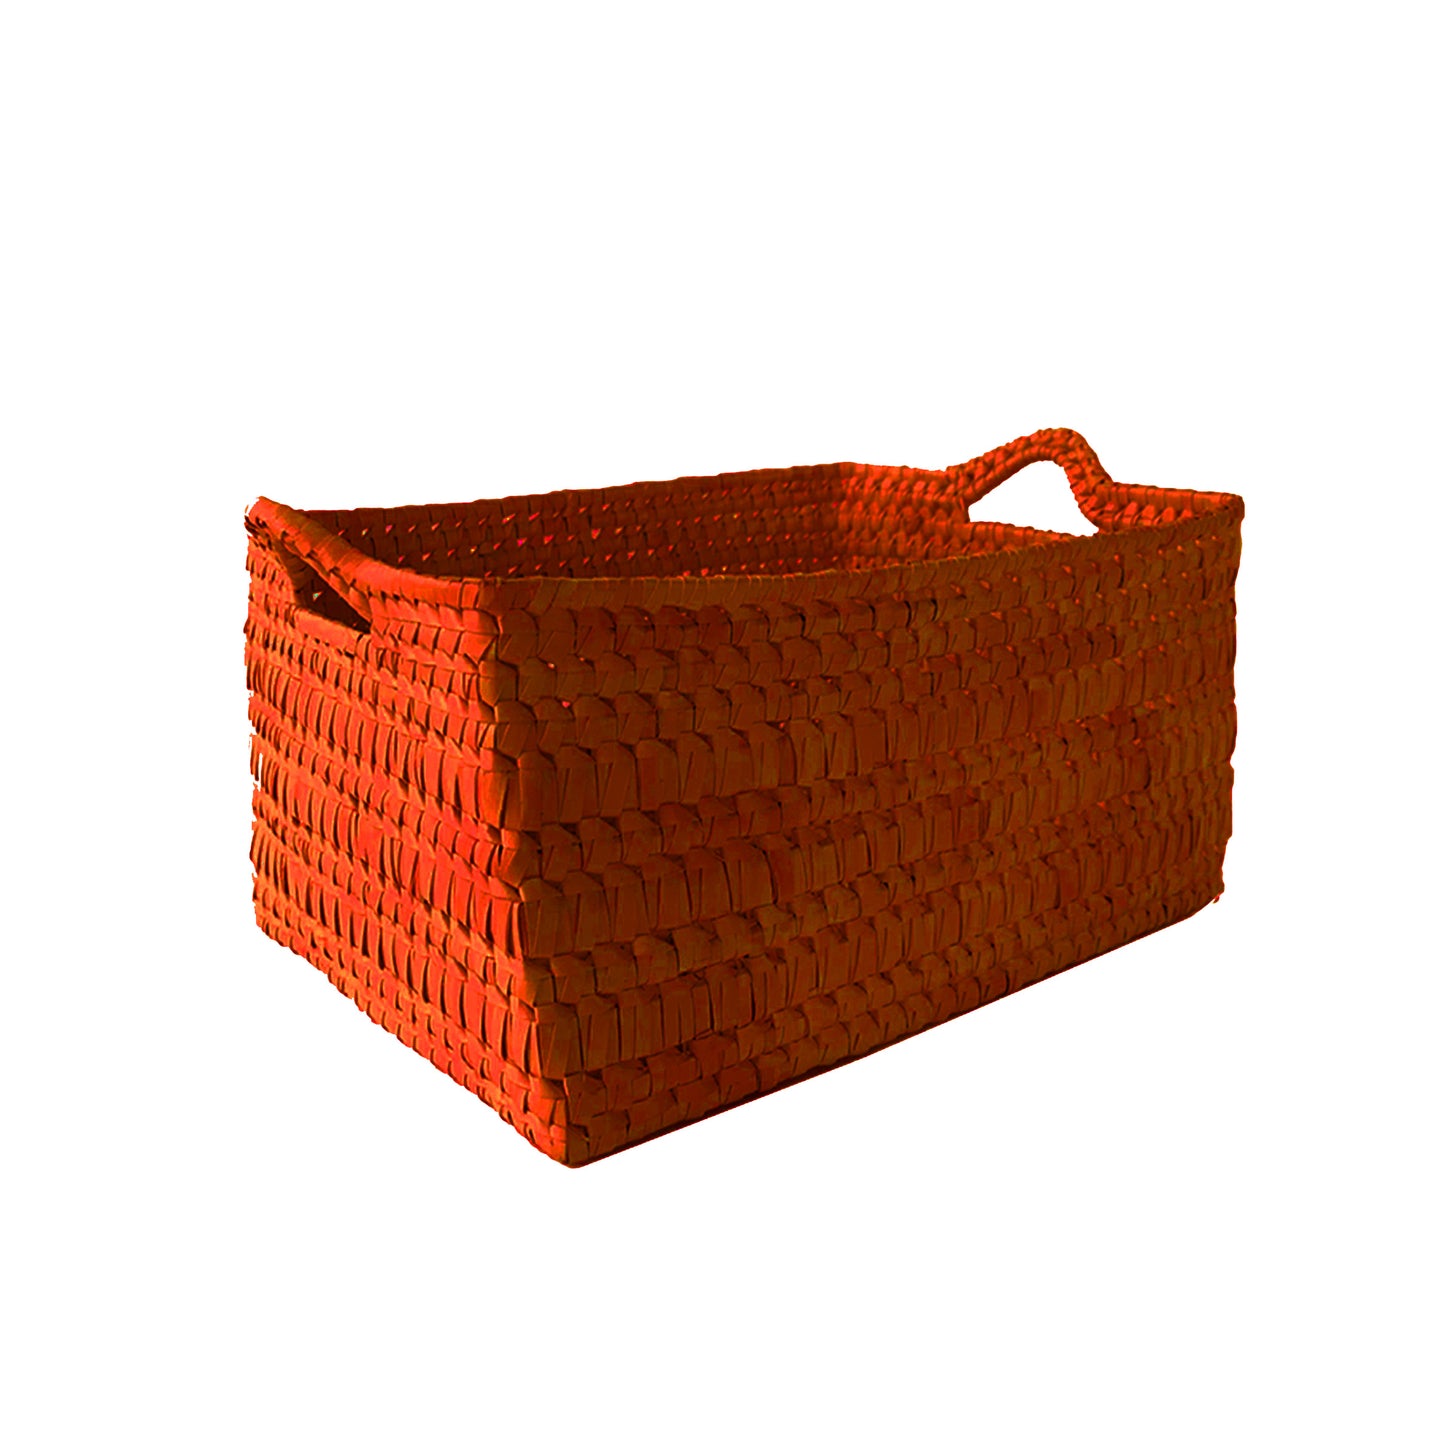 Handcrafted Rectangular Storage Basket with Handles Large - Rust